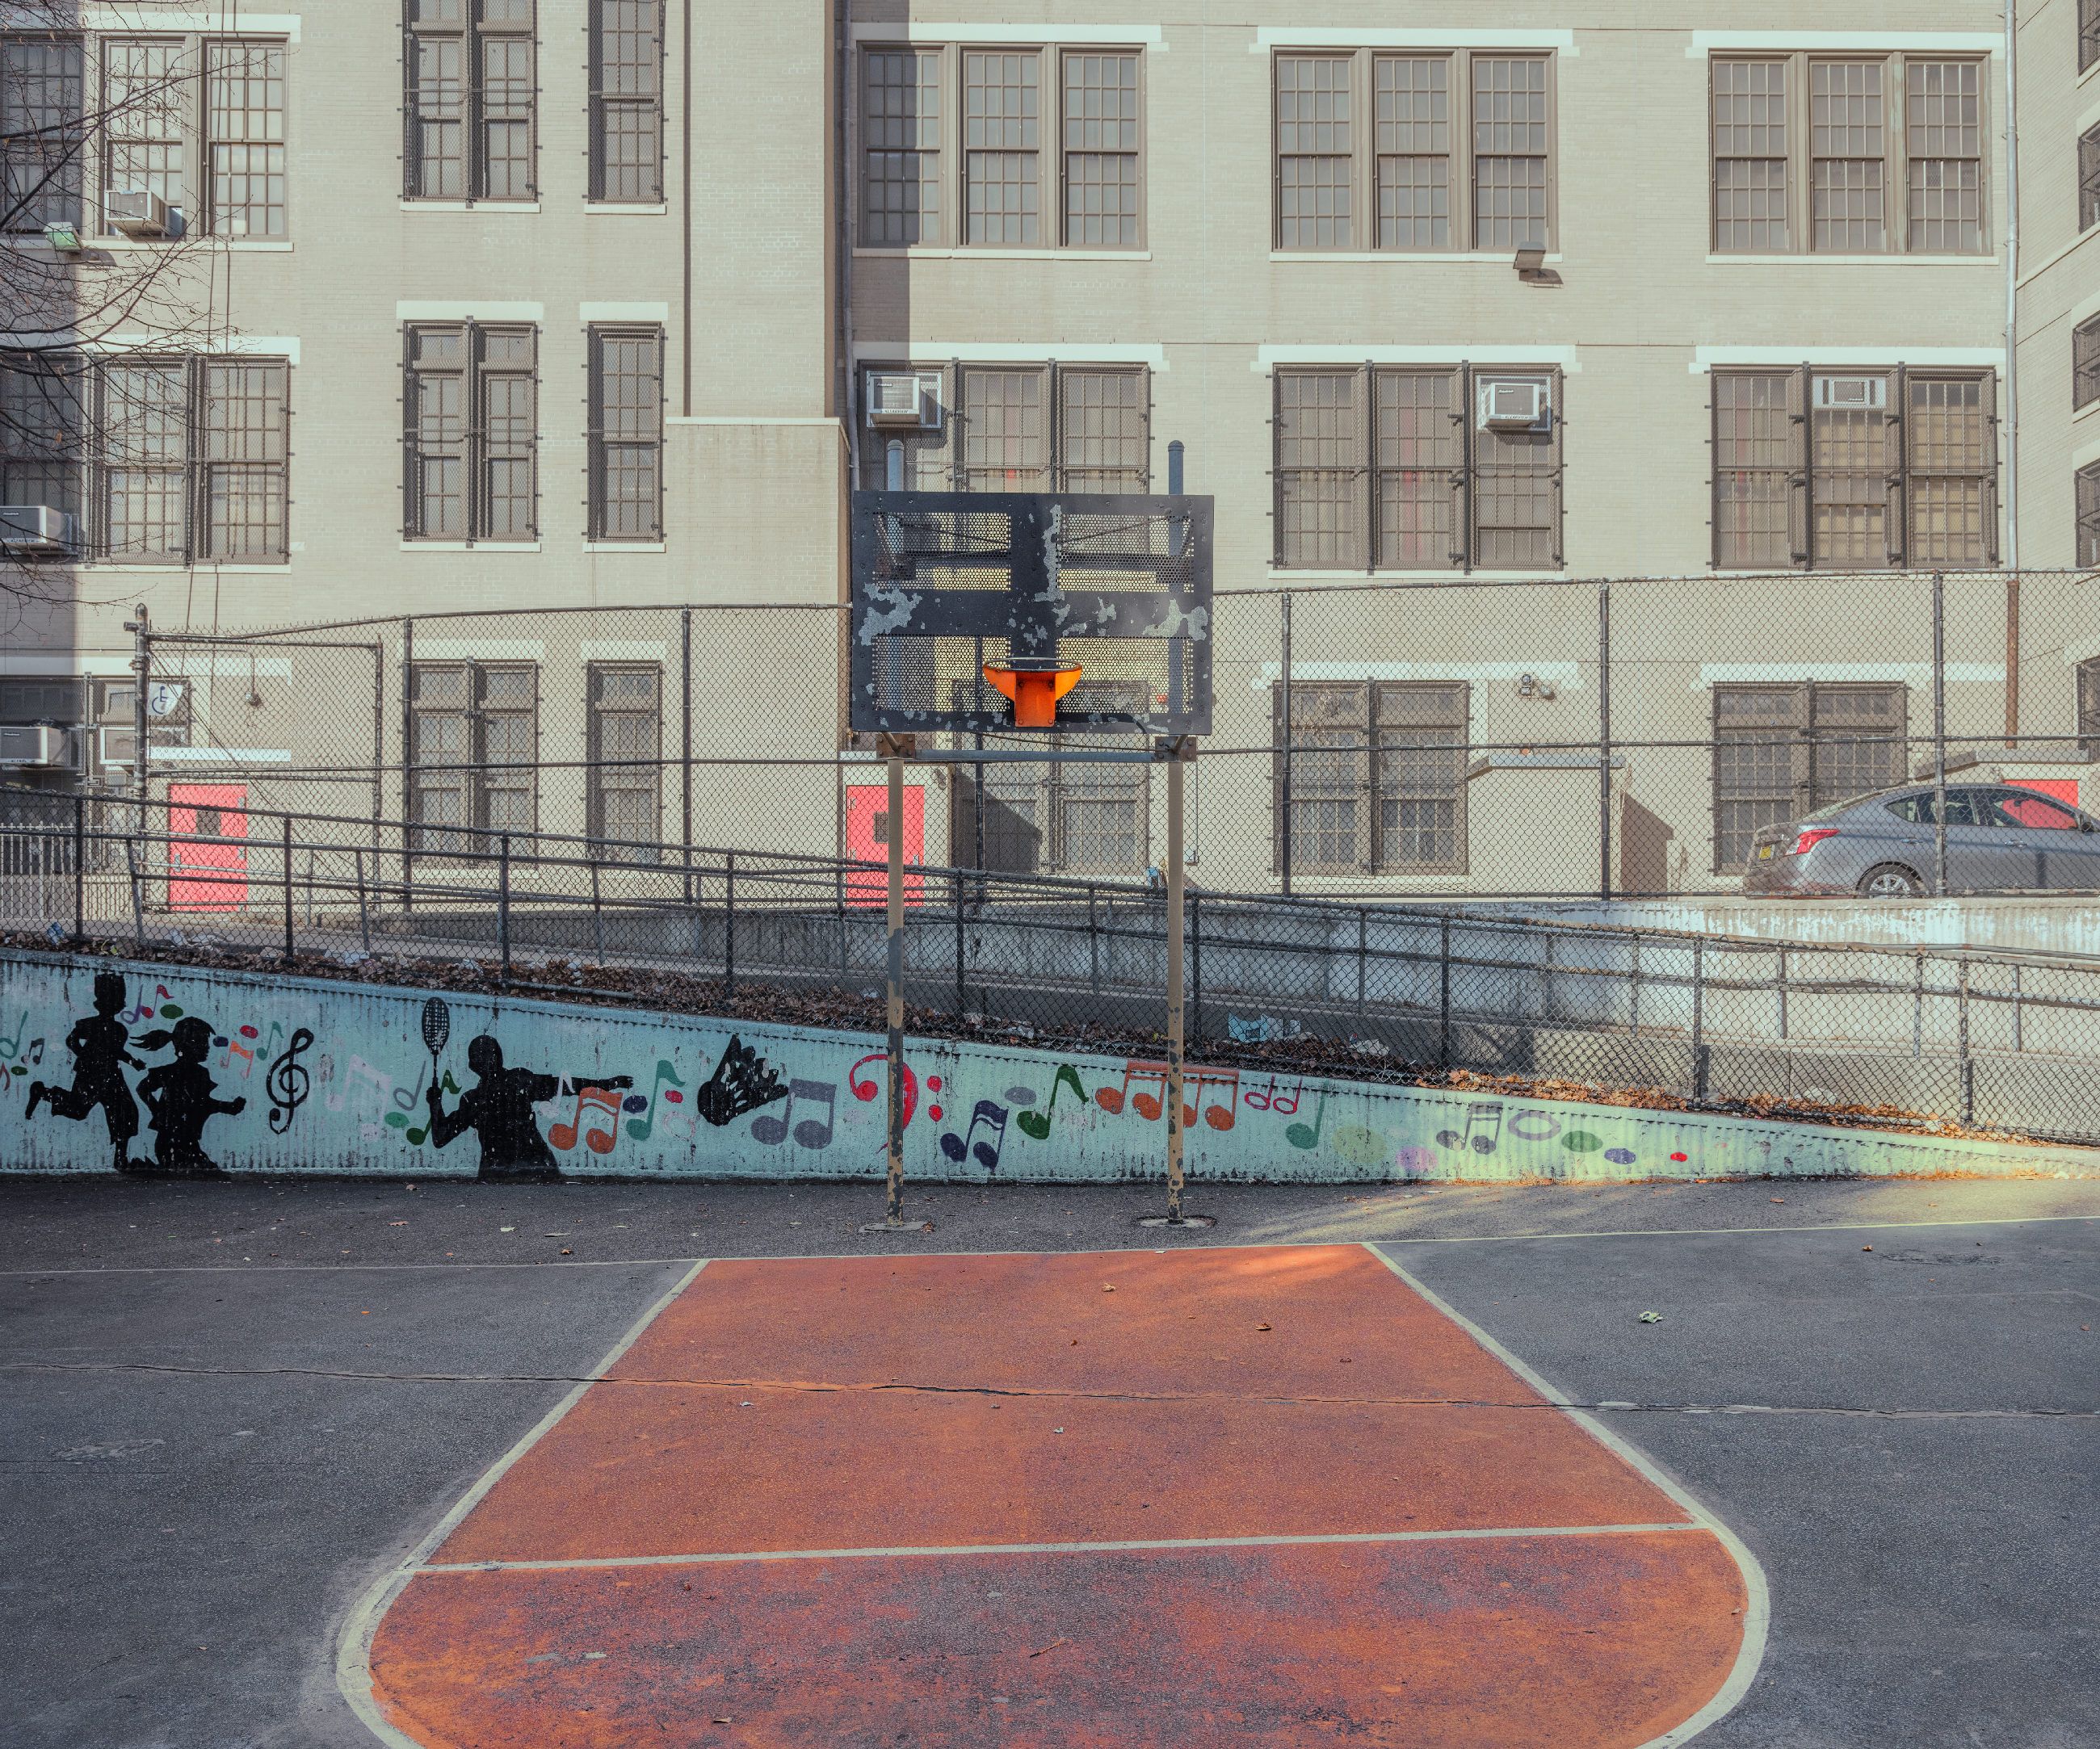 ludwig-favre-ny-basketball-courts-06